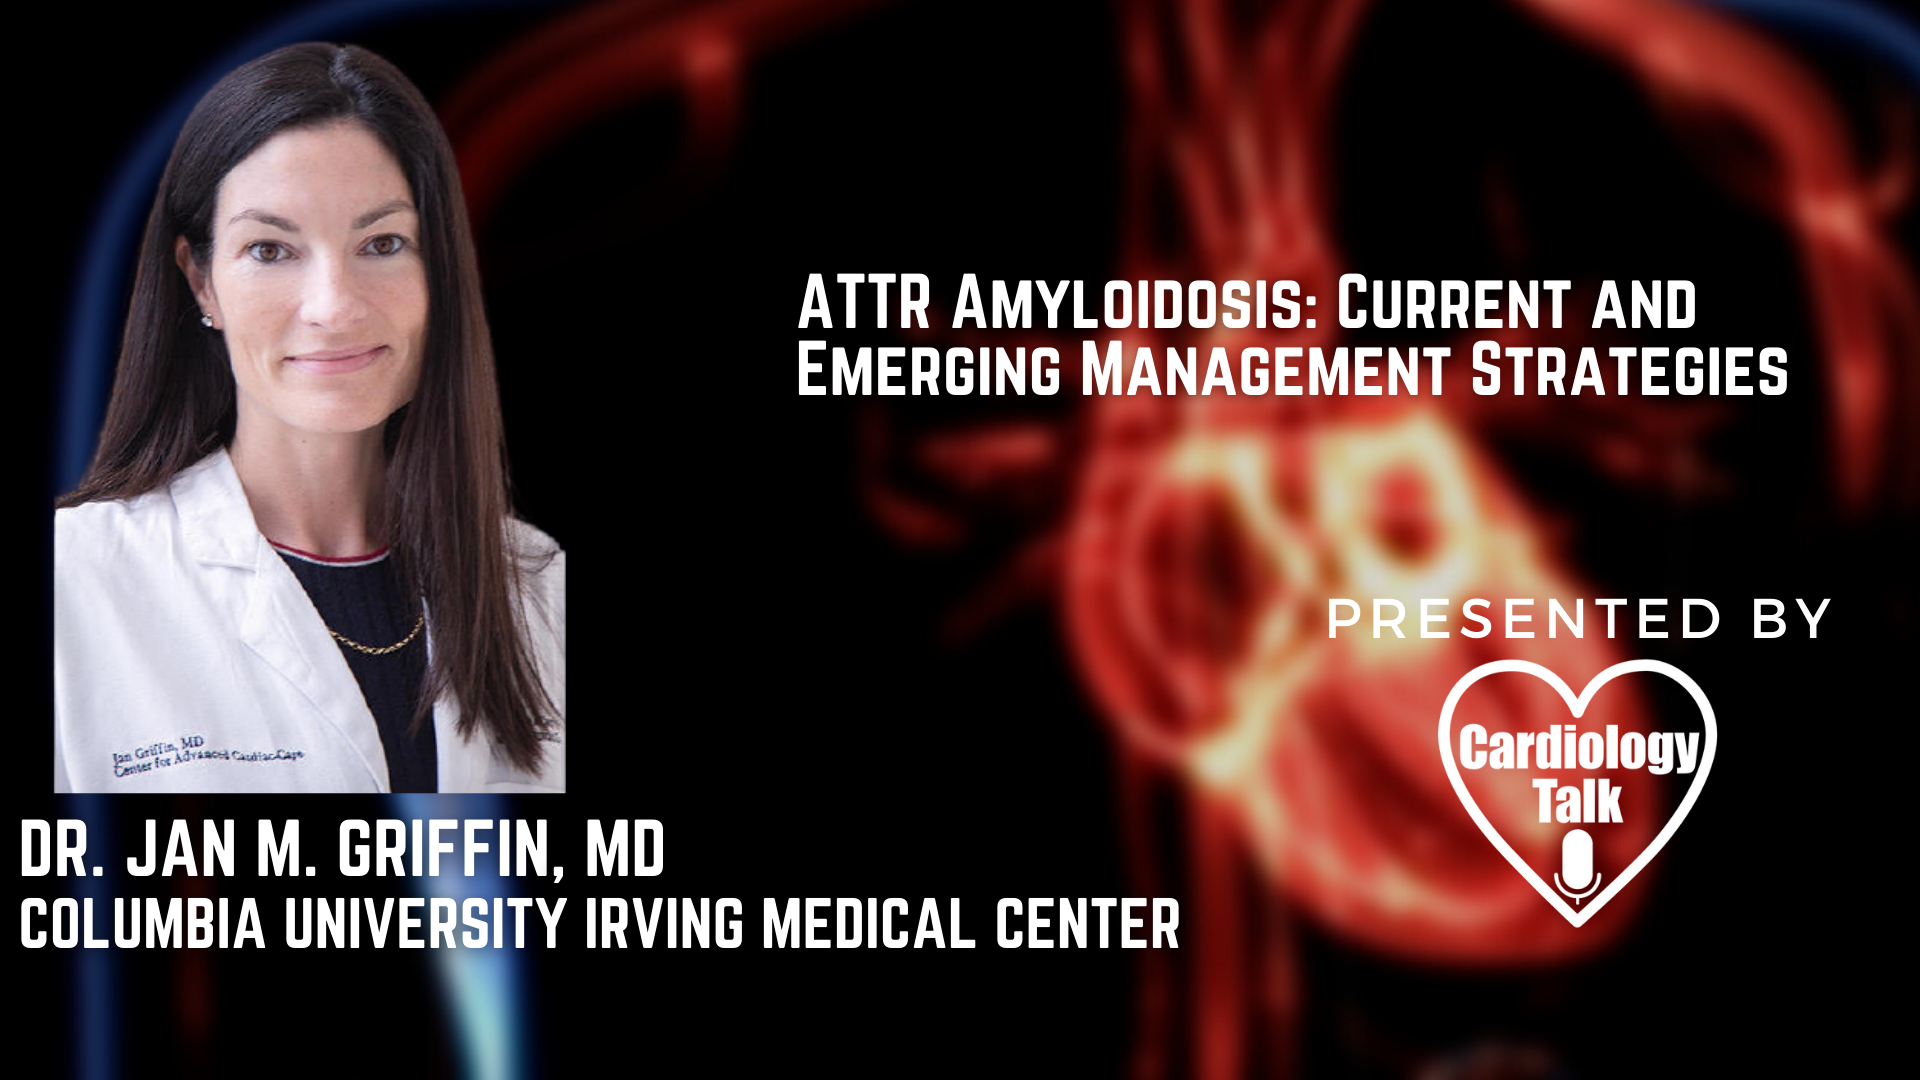 Jan M. Griffin, MD- ATTR Amyloidosis: Current and Emerging Management Strategies: JACC: CardioOncology State-of-the-Art Review @JanMGriffin   @columbiaMed  #Amyloidosis #Cardiology #Resea...